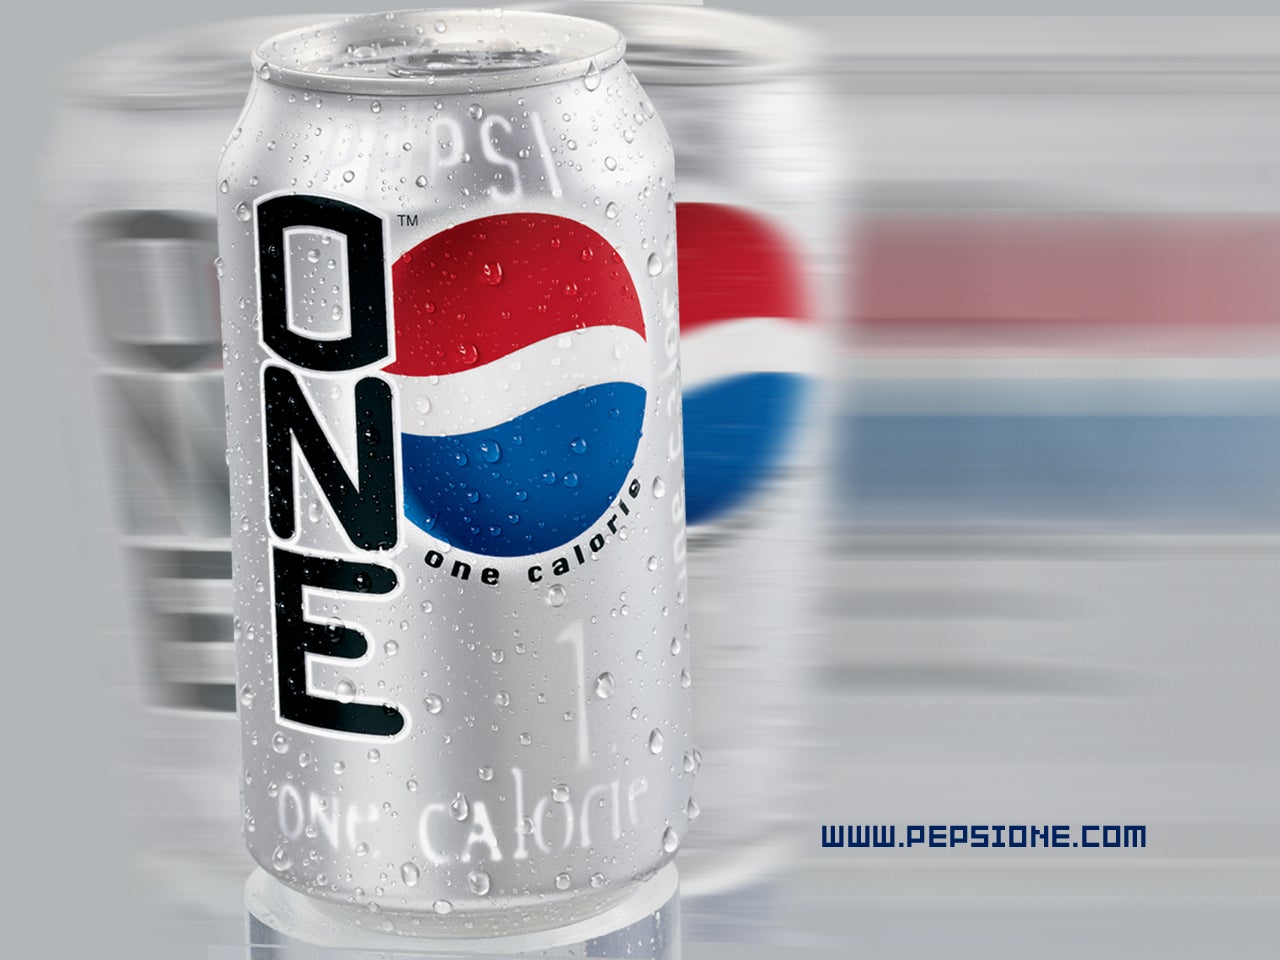 Pepsi One Won't Give You Cancer as Long as You Don't Drink a Whole Can